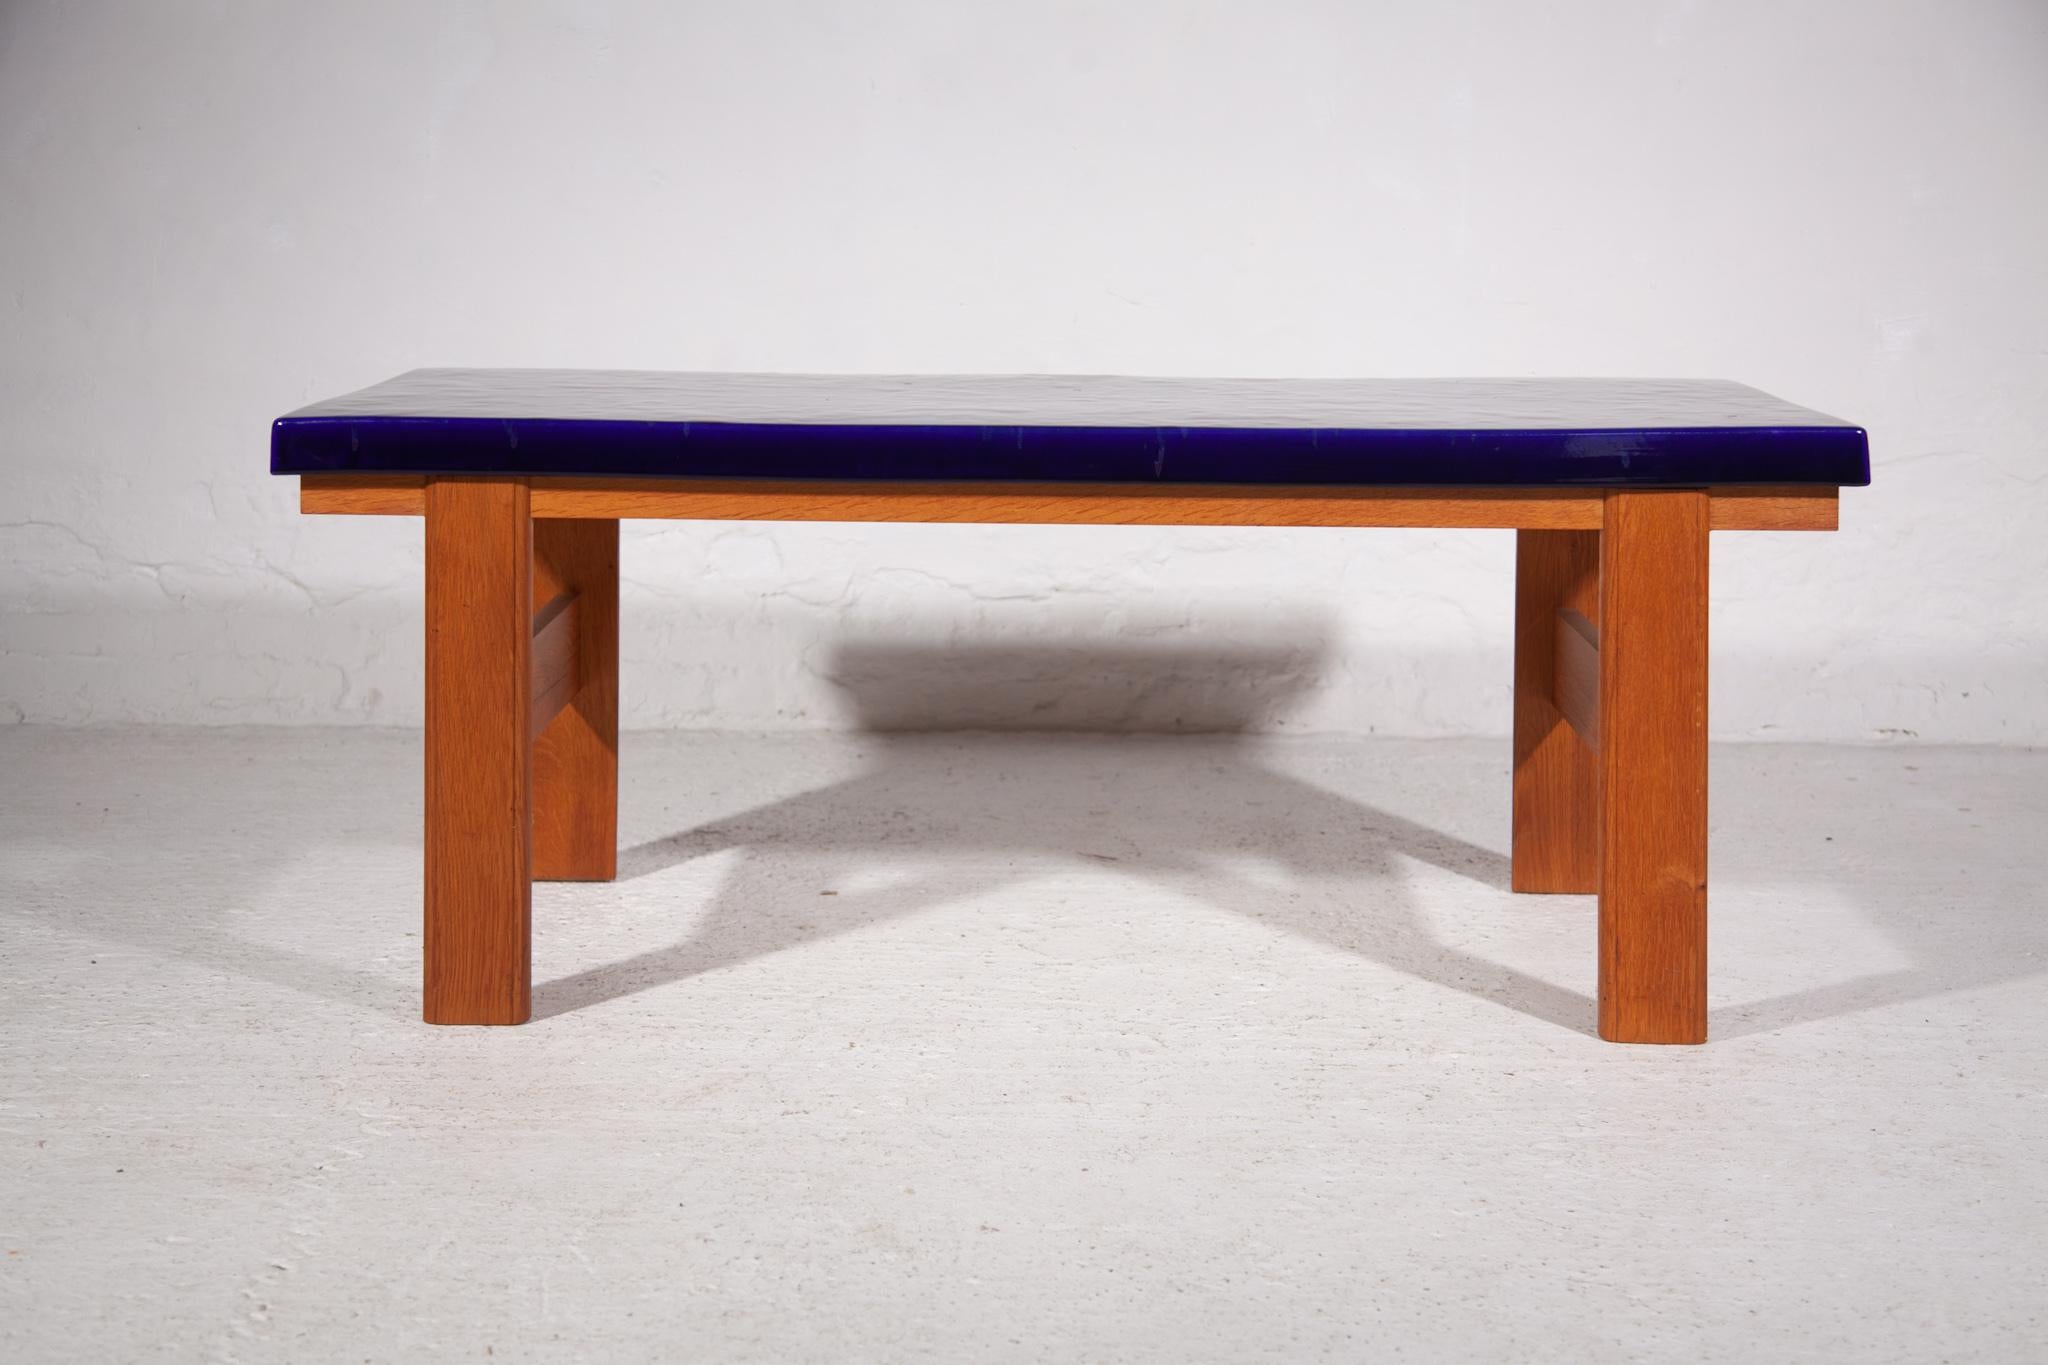 Large Rectangular Top Ceramic Blue and Orange Tile Coffee Table, 1970s For Sale 2